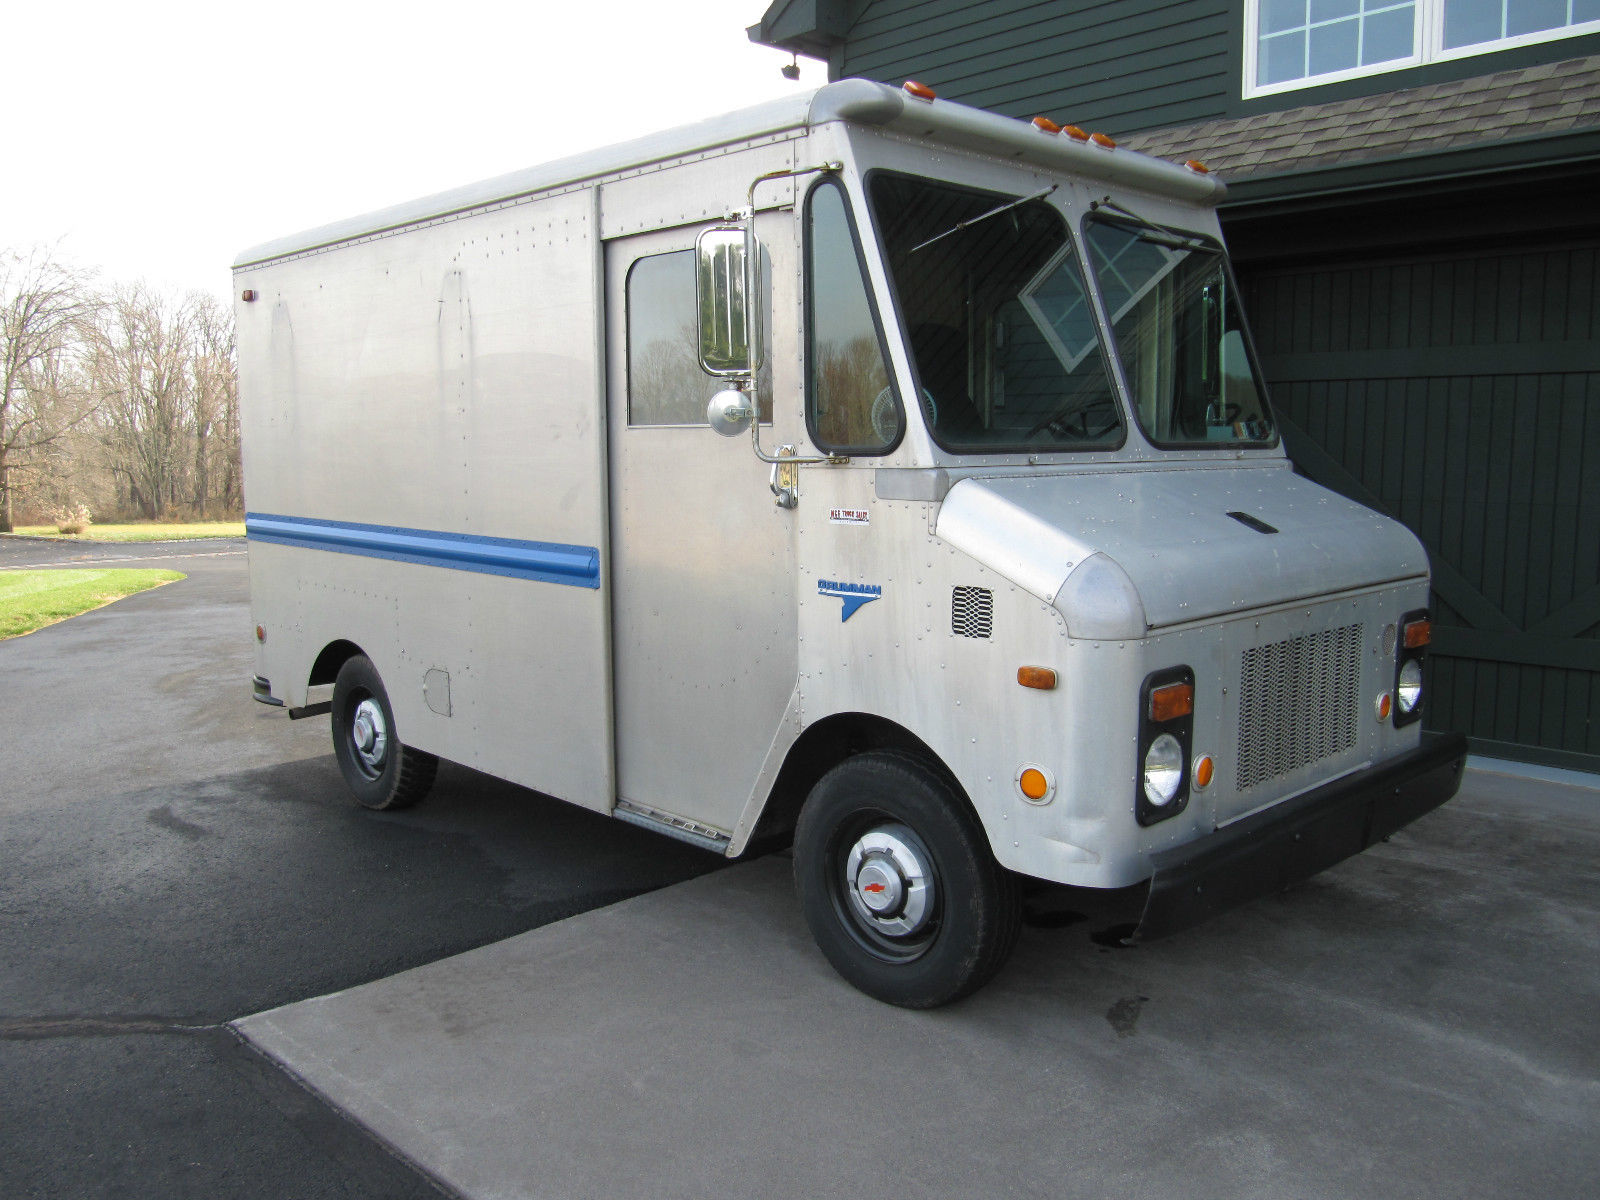 1977 Chevrolet grumman Olson / 10Foot. Van for sale in Whitehouse, New Jersey, United States for ...